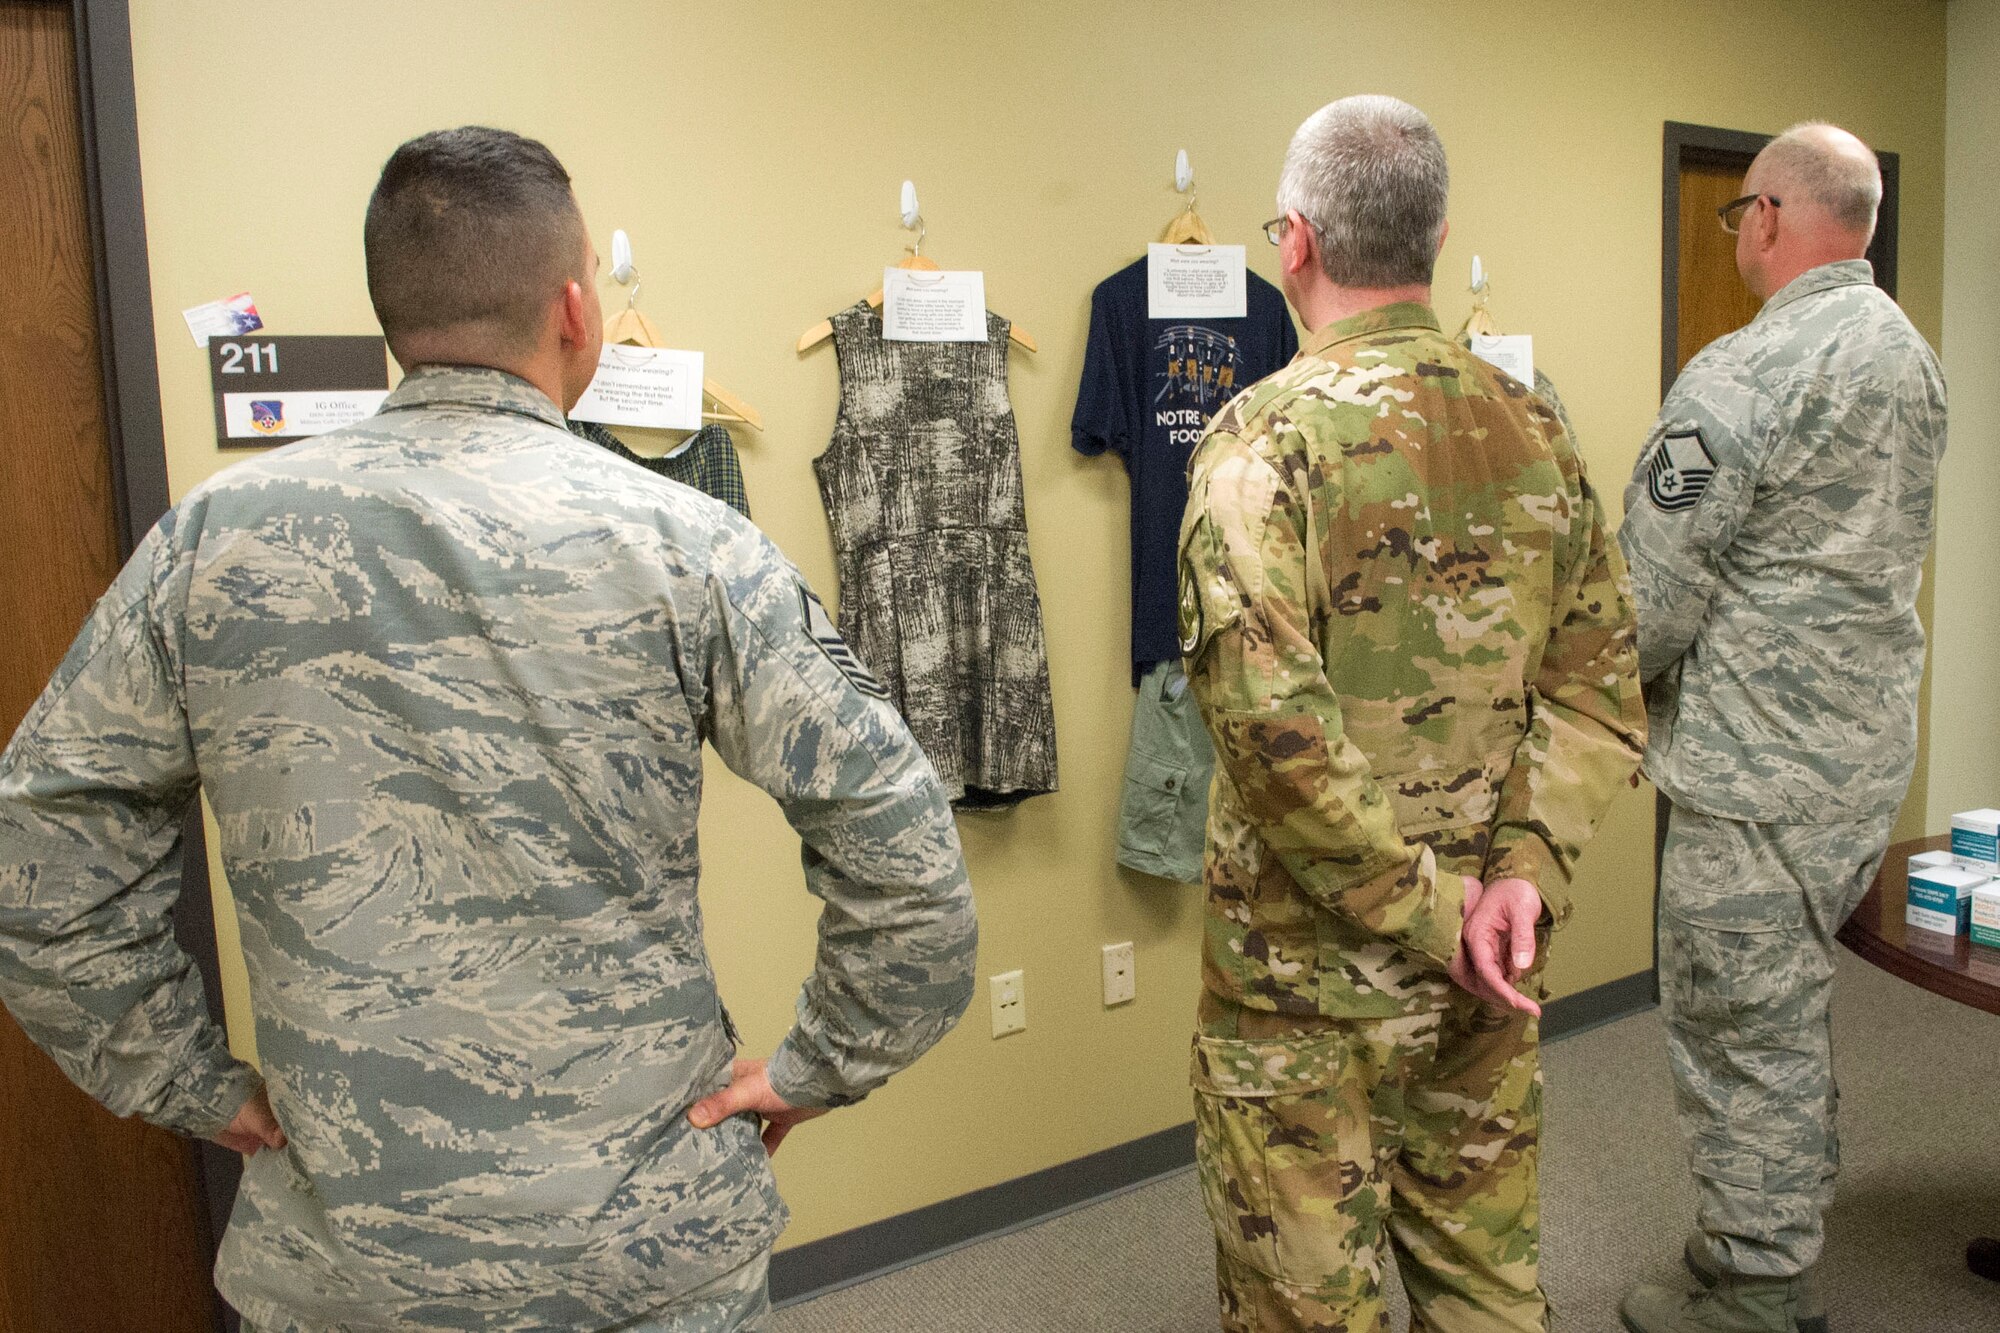 Members from the 434th Air Refueling Wing visit the “What Were You Wearing” art illustration at Grissom Air Reserve Base, Ind., April 19, 2019 in building 596. The display first debuted at the University of Arkansas in 2014 and is designed to challenge victim blaming based on the myth that clothing causes sexual violence. 
(U.S. Air Force photo by Staff Sgt. Courtney Dotson-Essett)